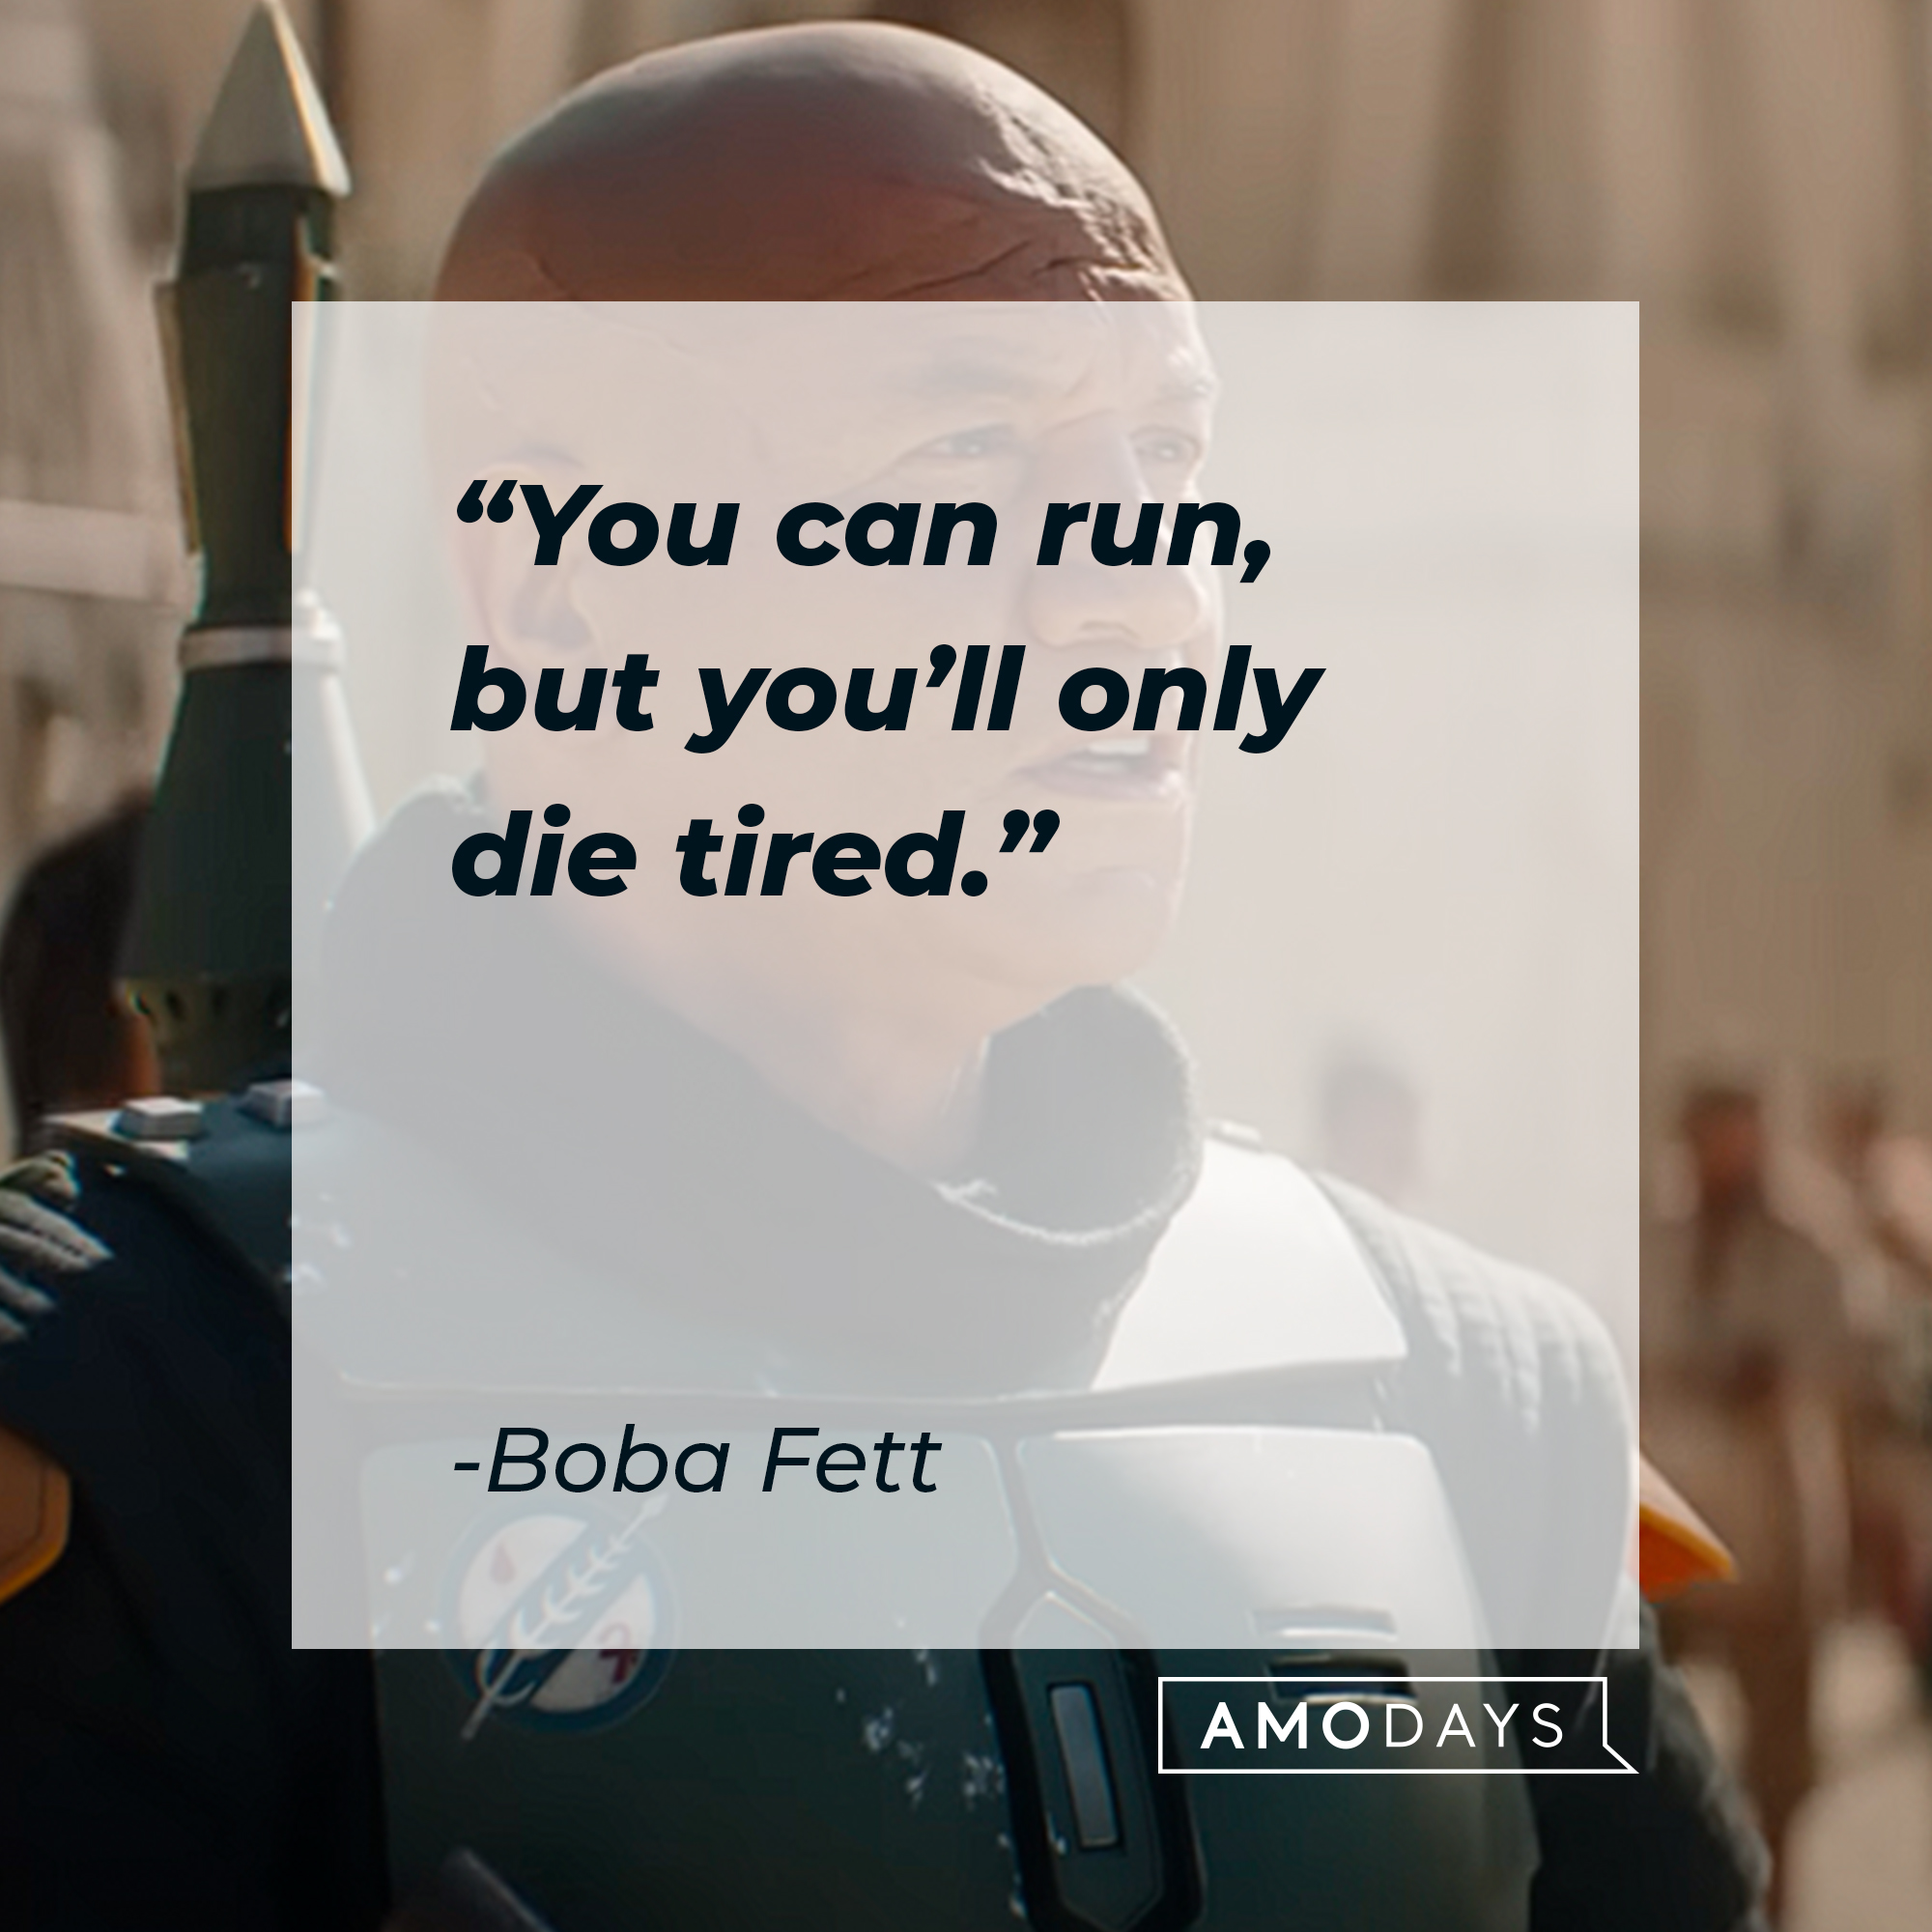 Boba Fett, with his quote: “You can run, but you’ll only die tired.” │ Source: youtube.com/StarWars